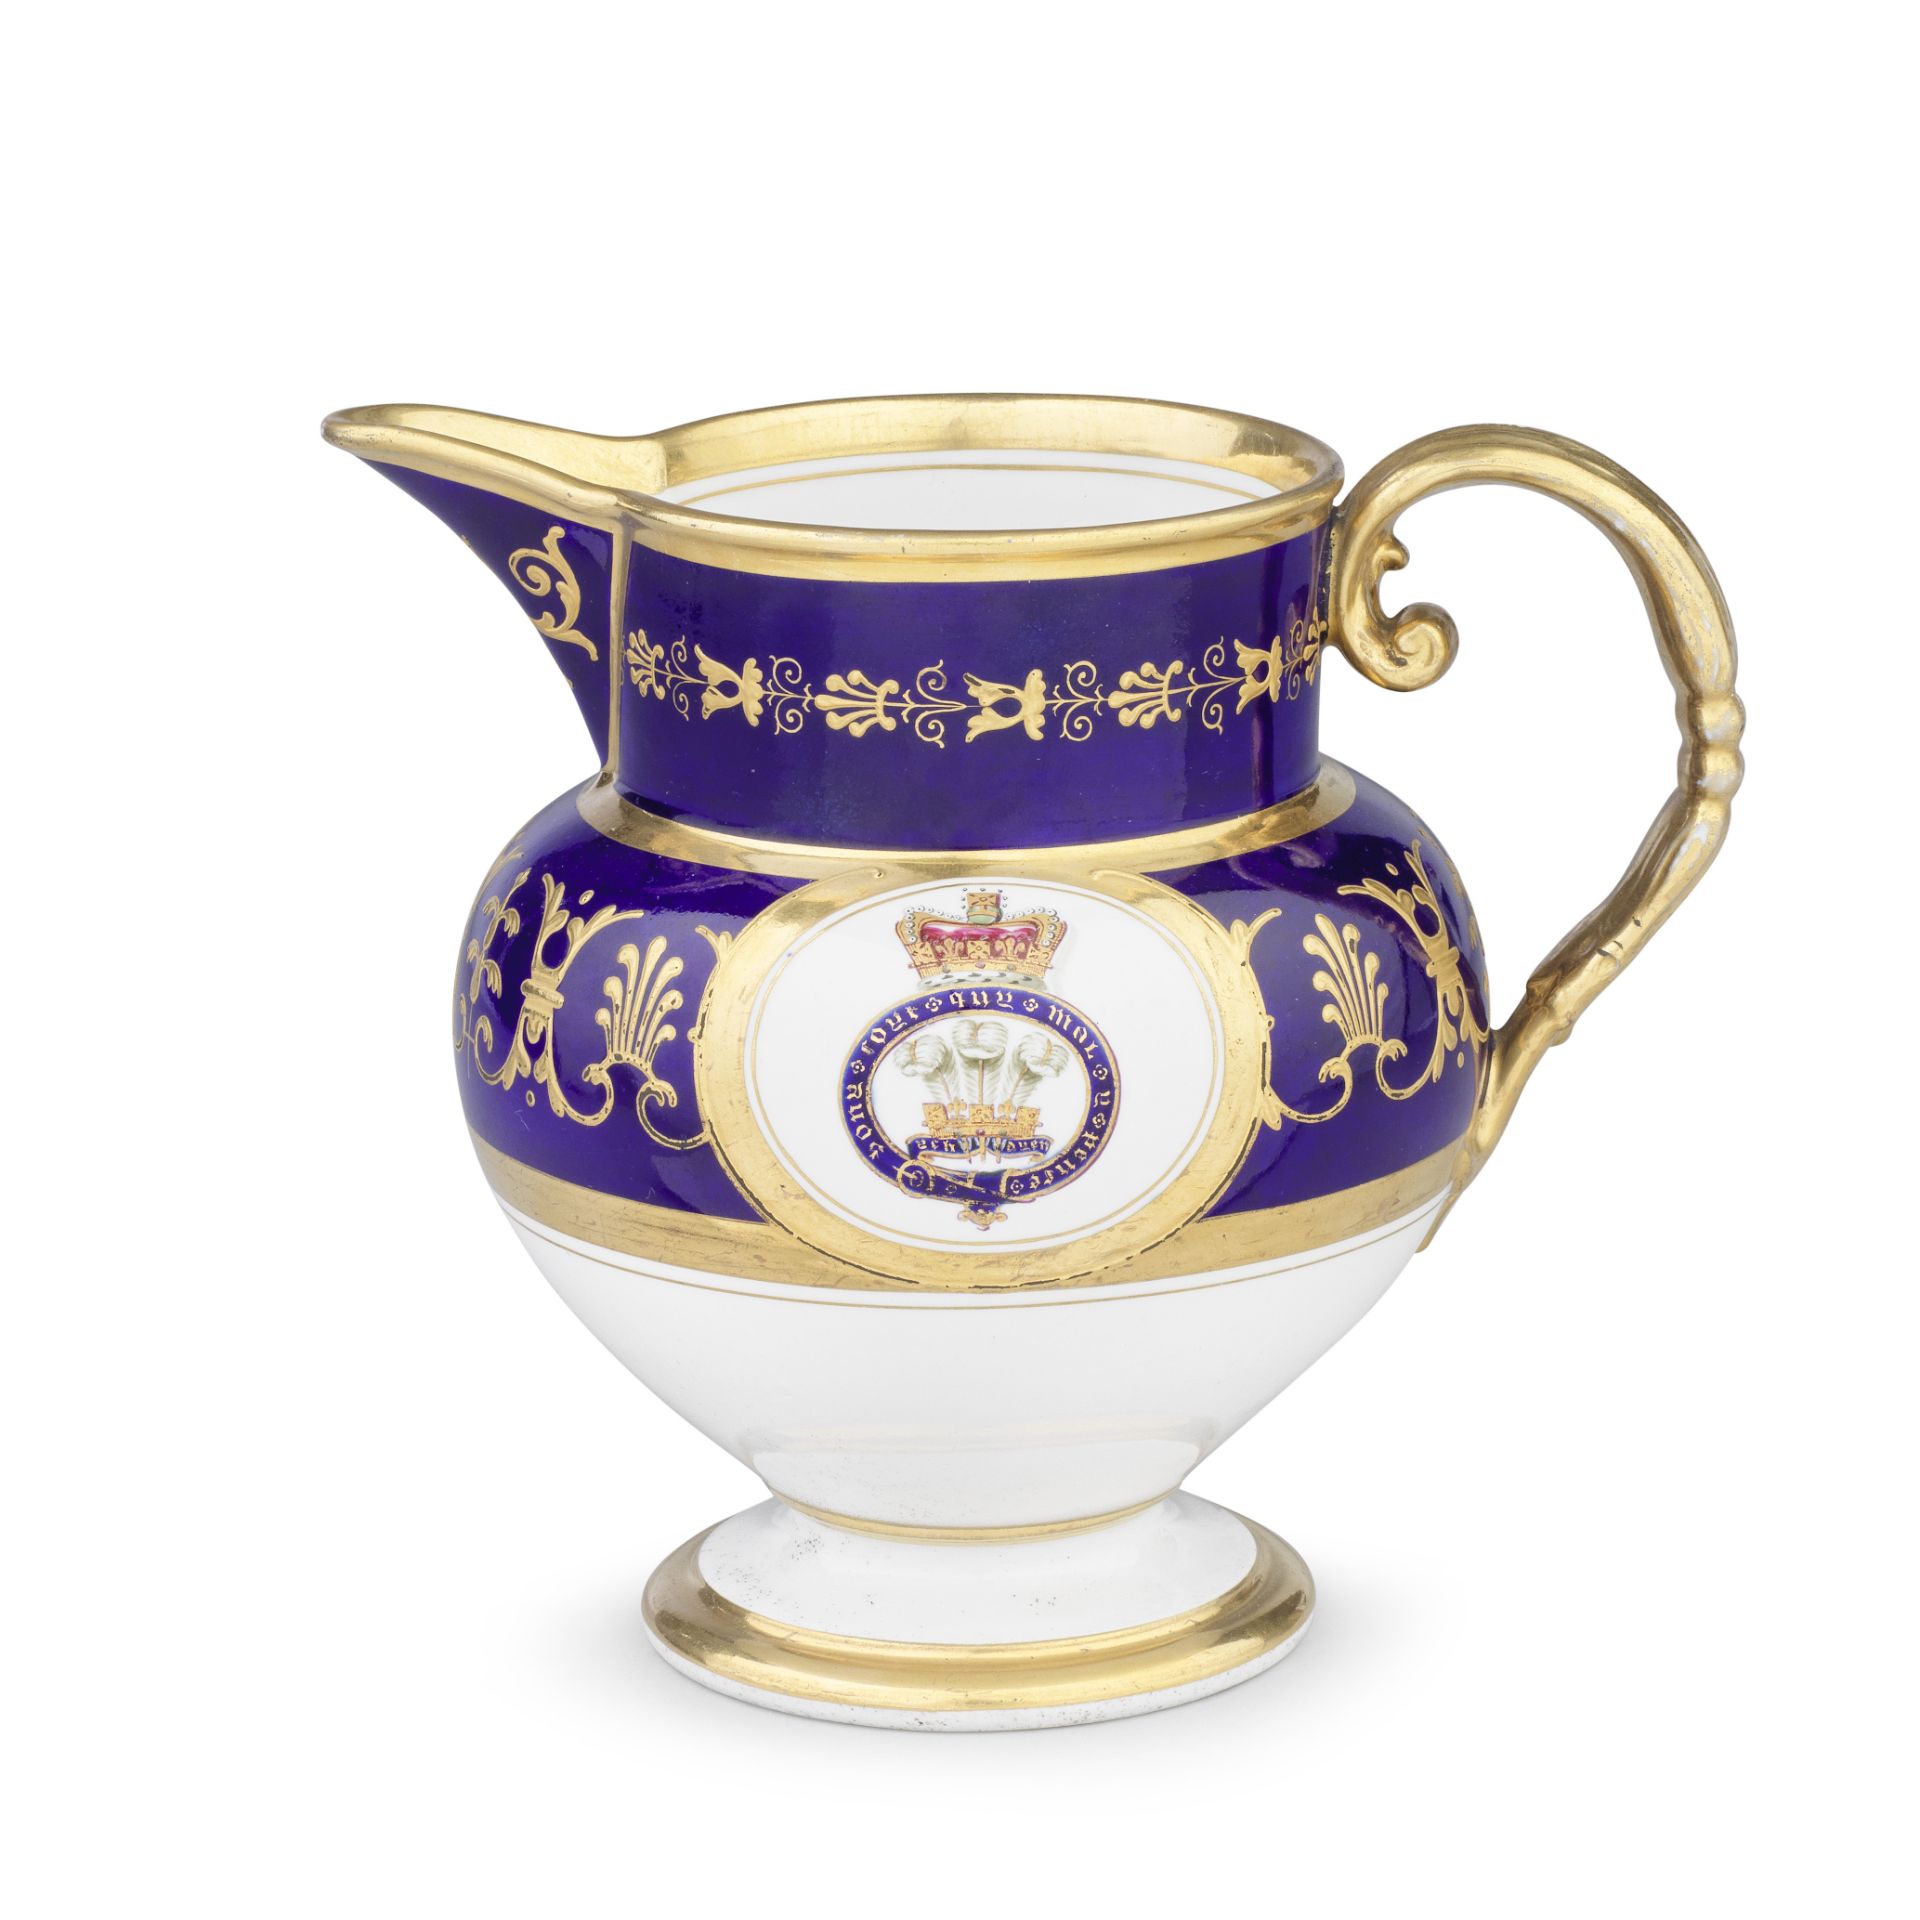 A very rare Flight, Barr and Barr Worcester jug from the Prince Regent Service, circa 1815